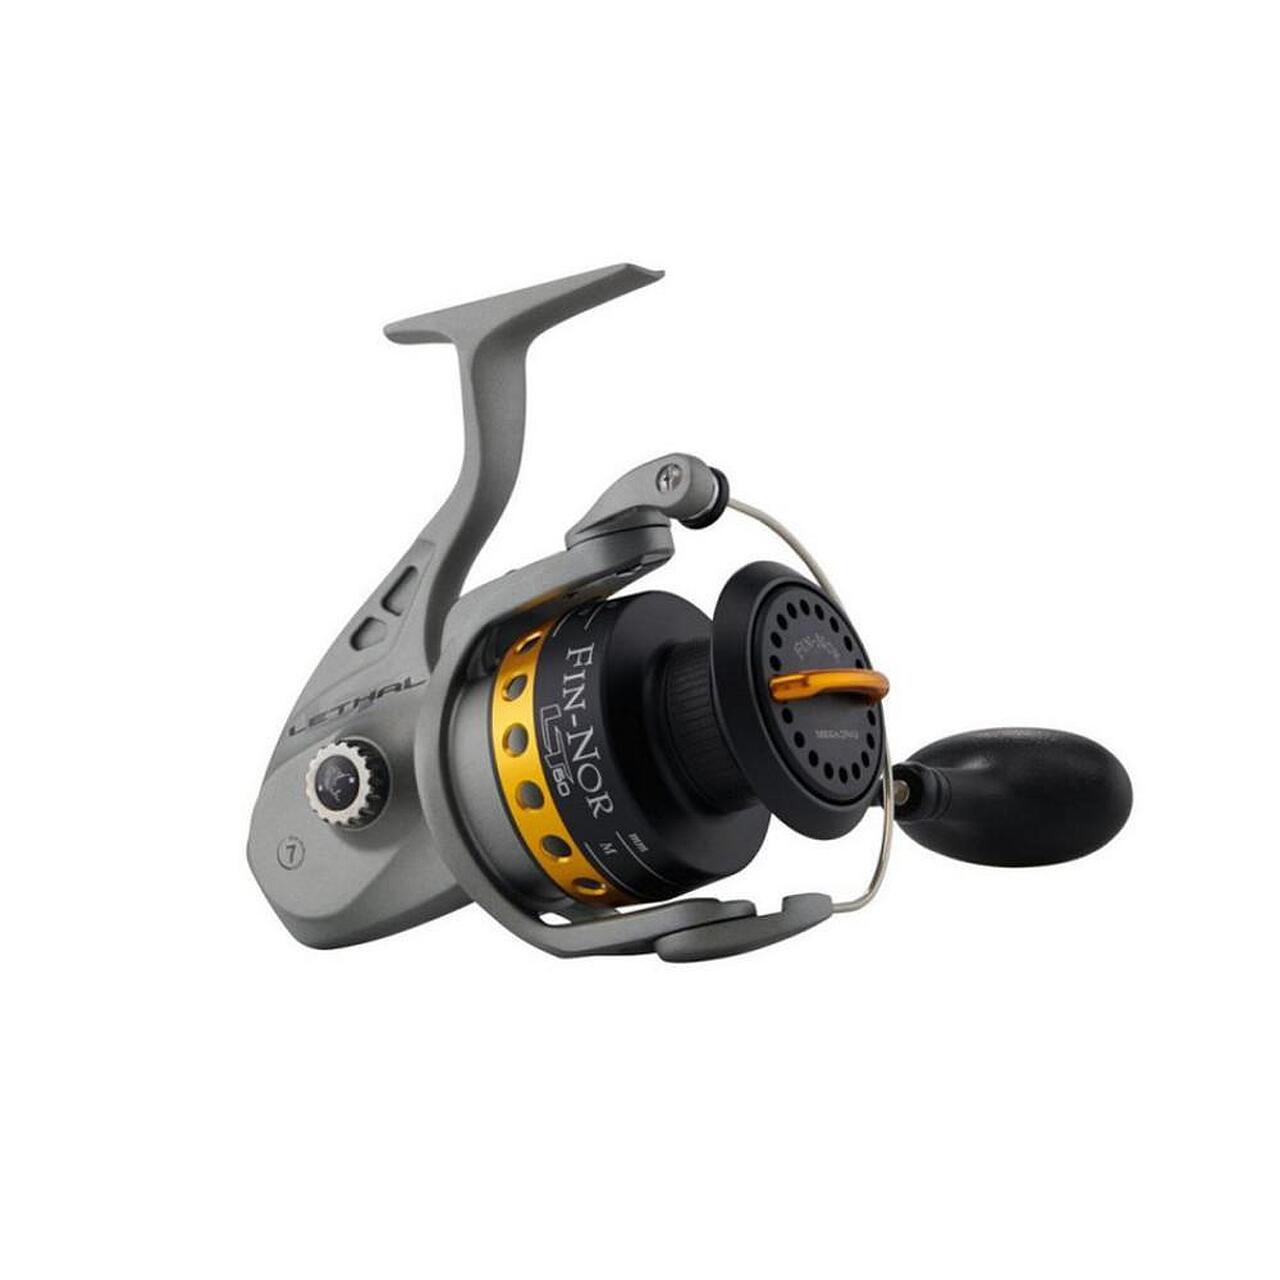 Fin-Nor Offshore 10500 Spin Reel